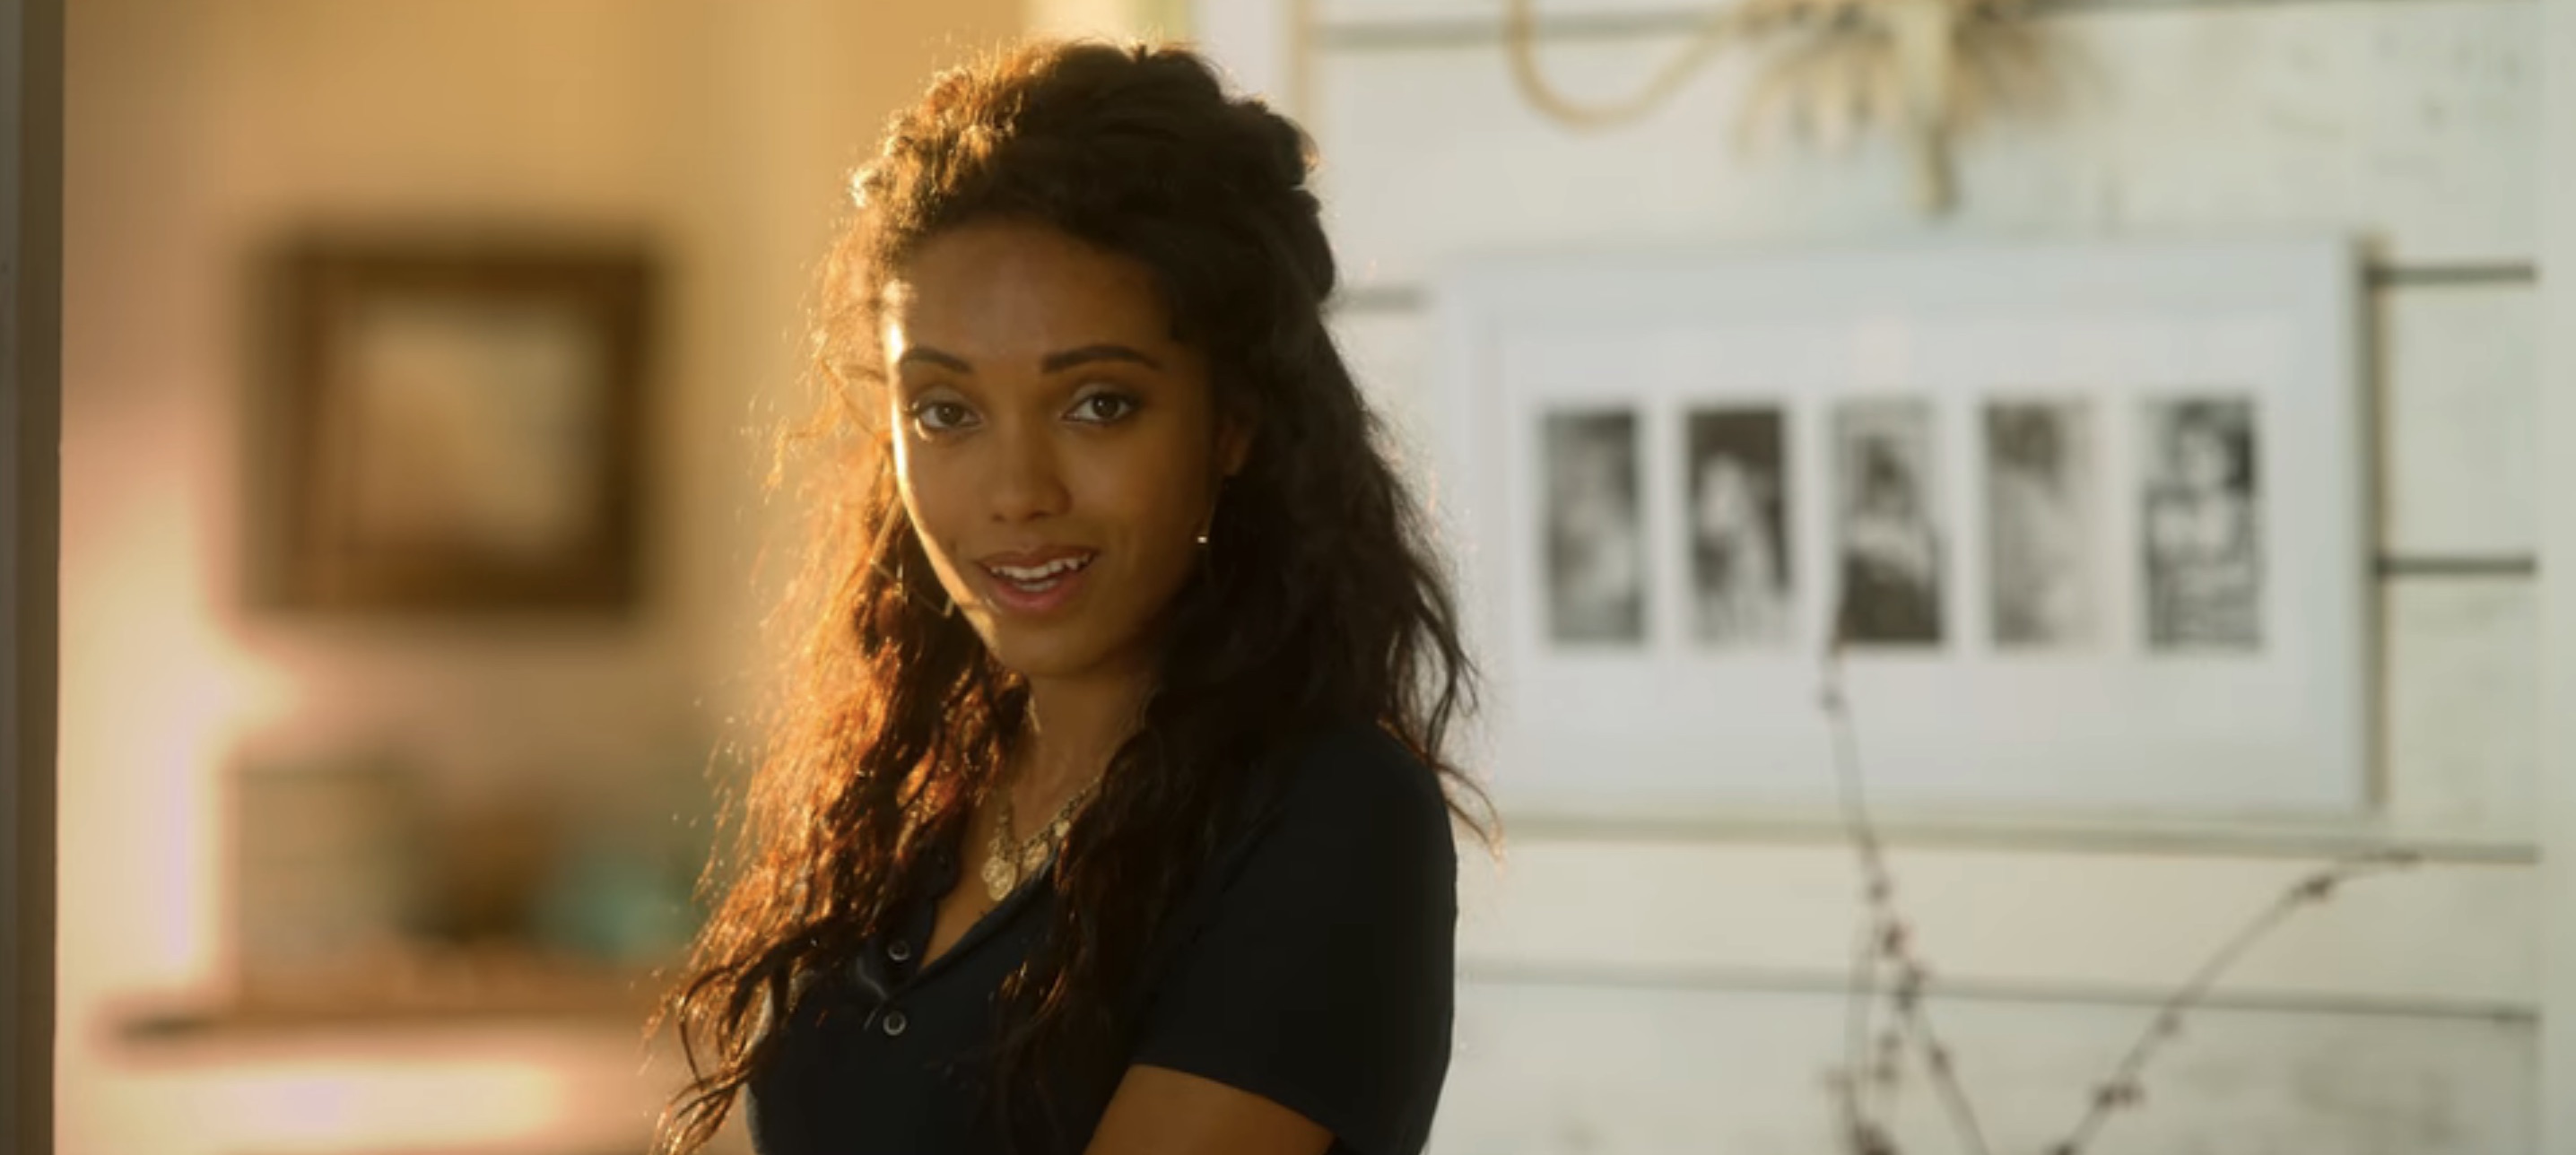 The Kissing Booth 3 Cast - Maisie Richardson-Sellers as Chloe